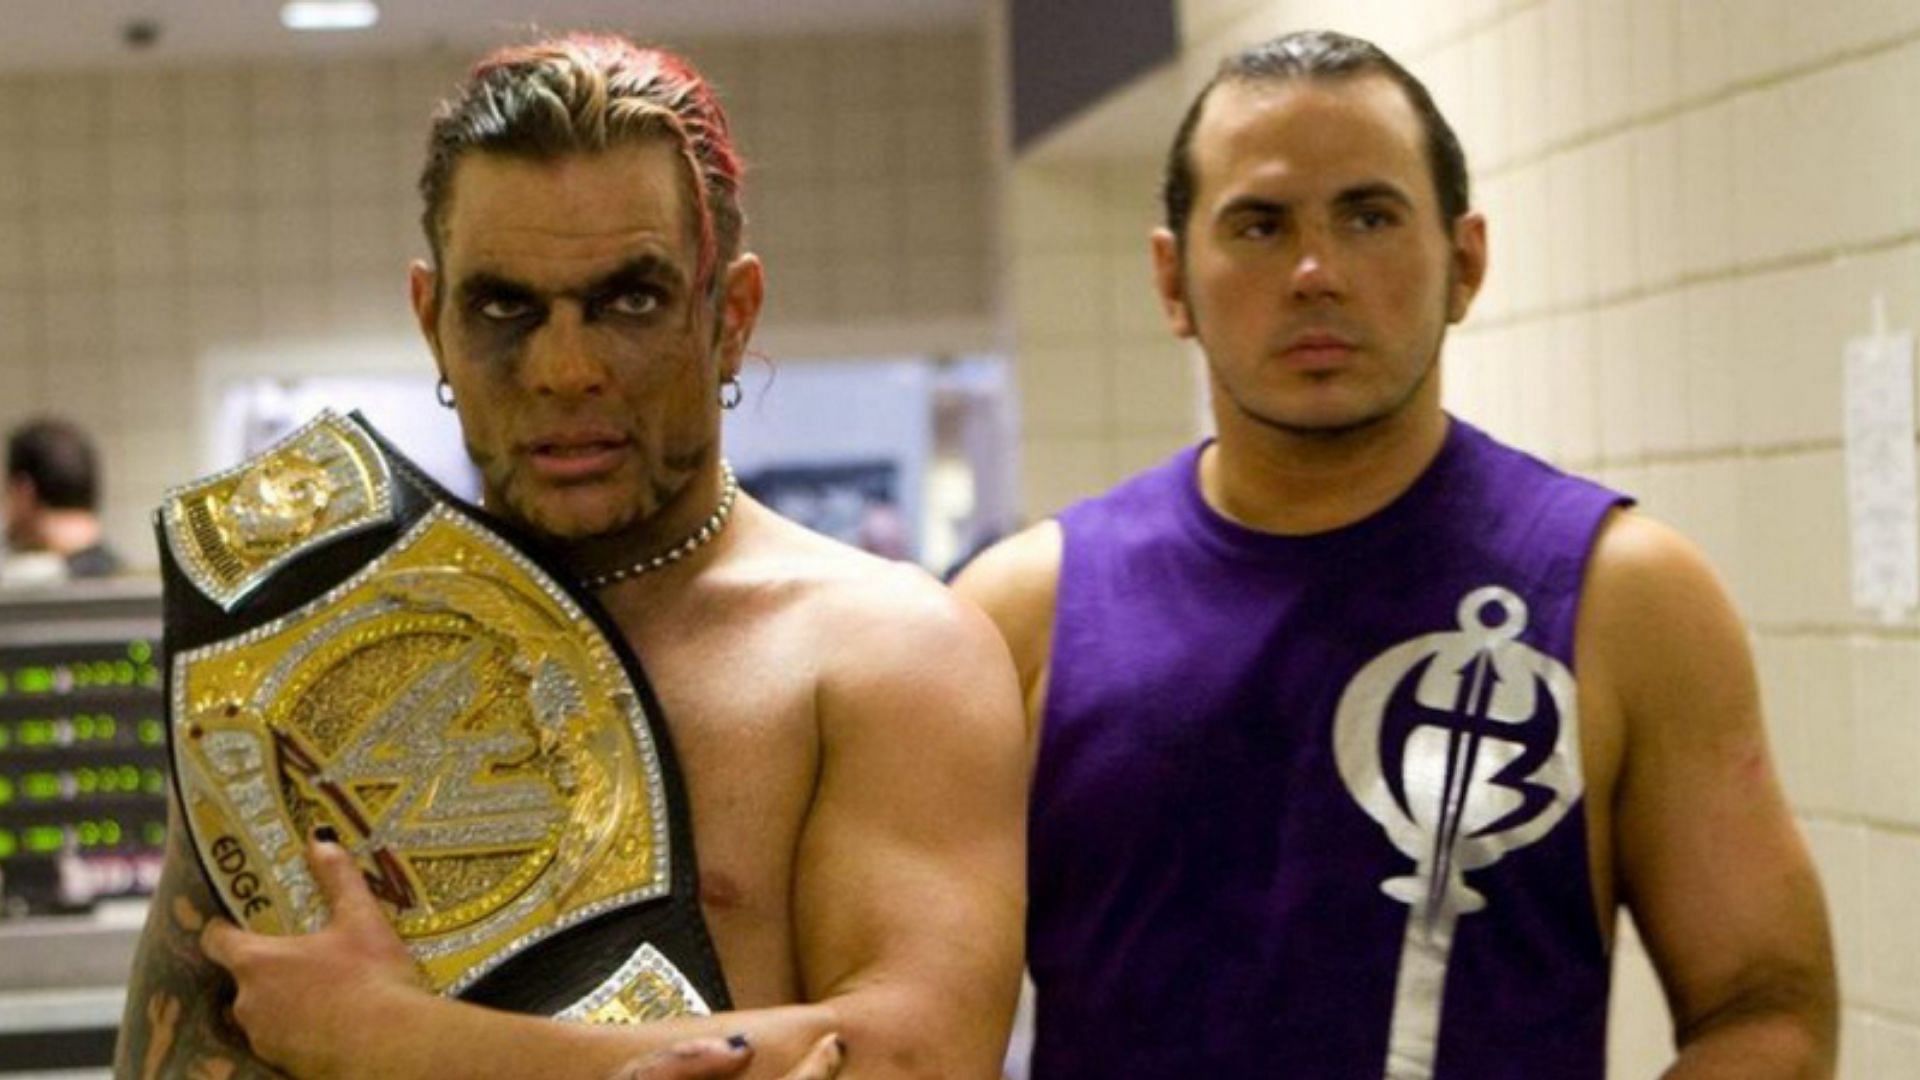 The Hardy Boyz backstage at a WWE event in 2008